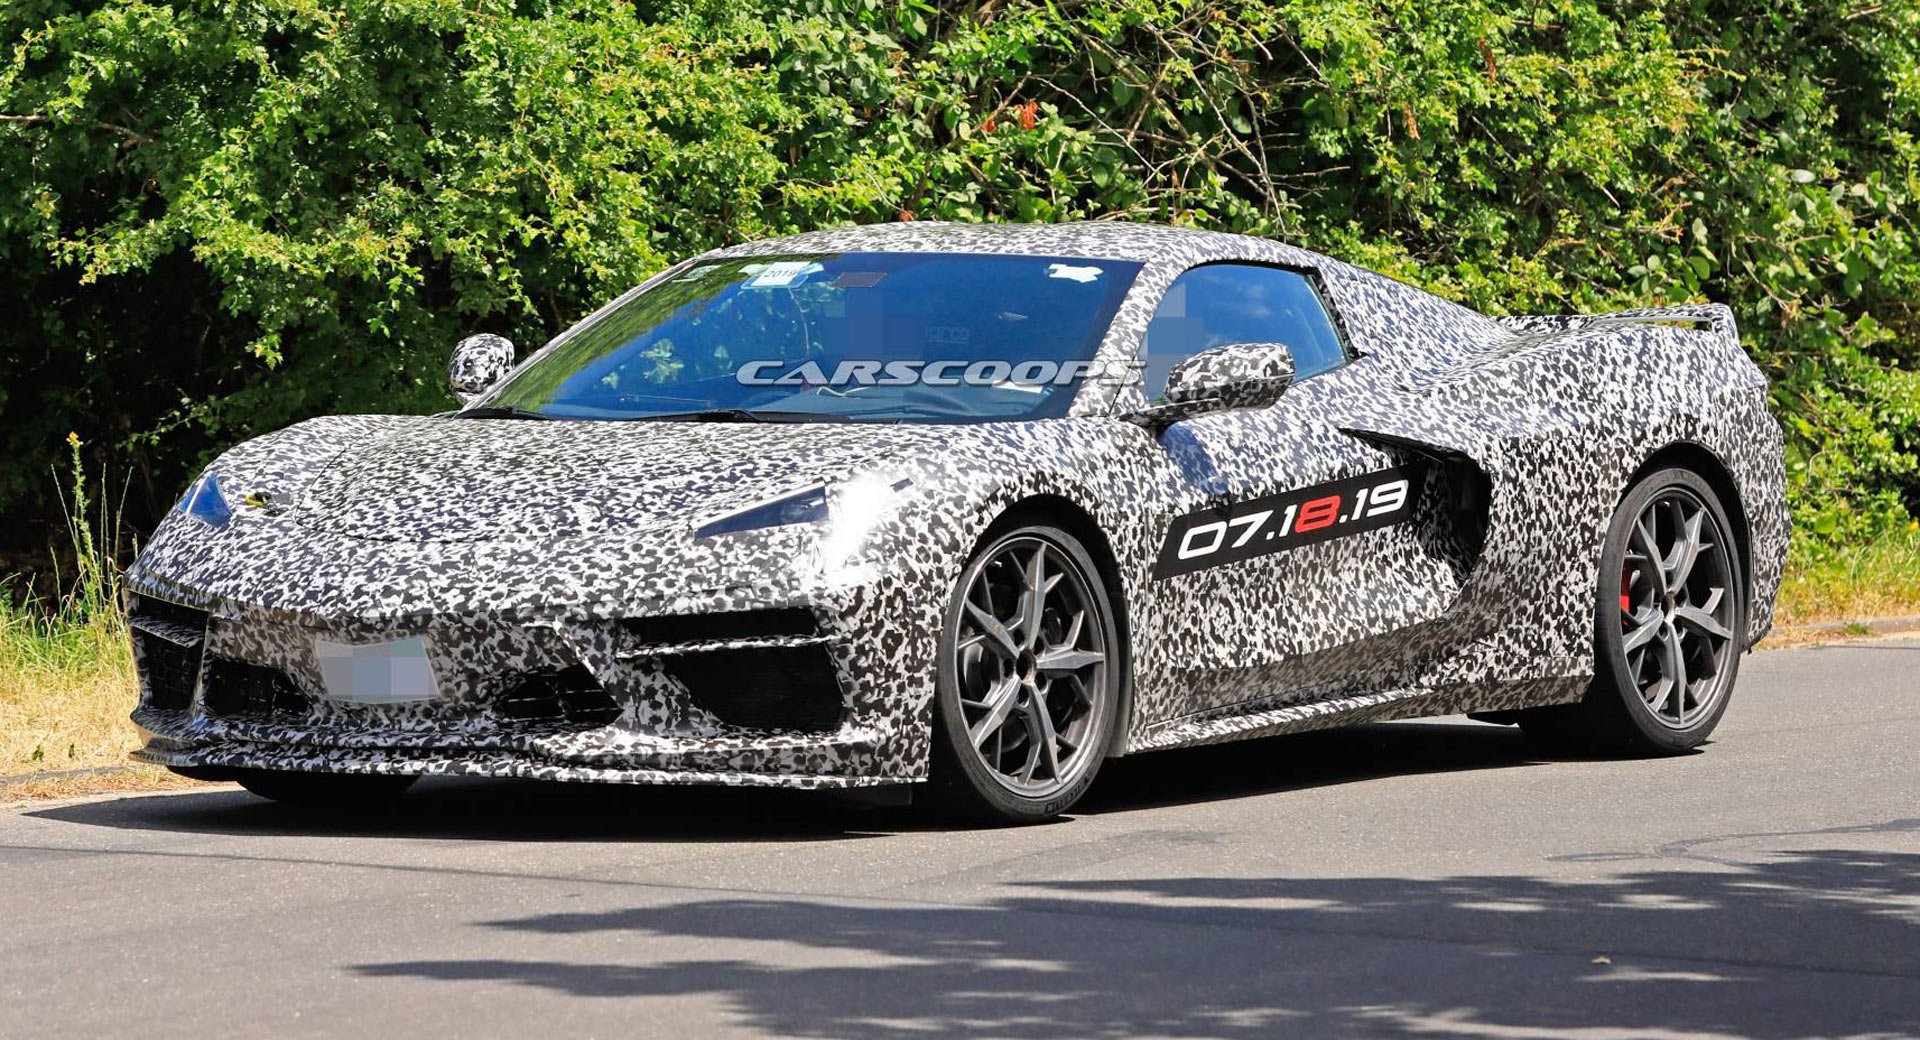 Want To See The C8 Corvette Up Close? Go To Detroit On July 27